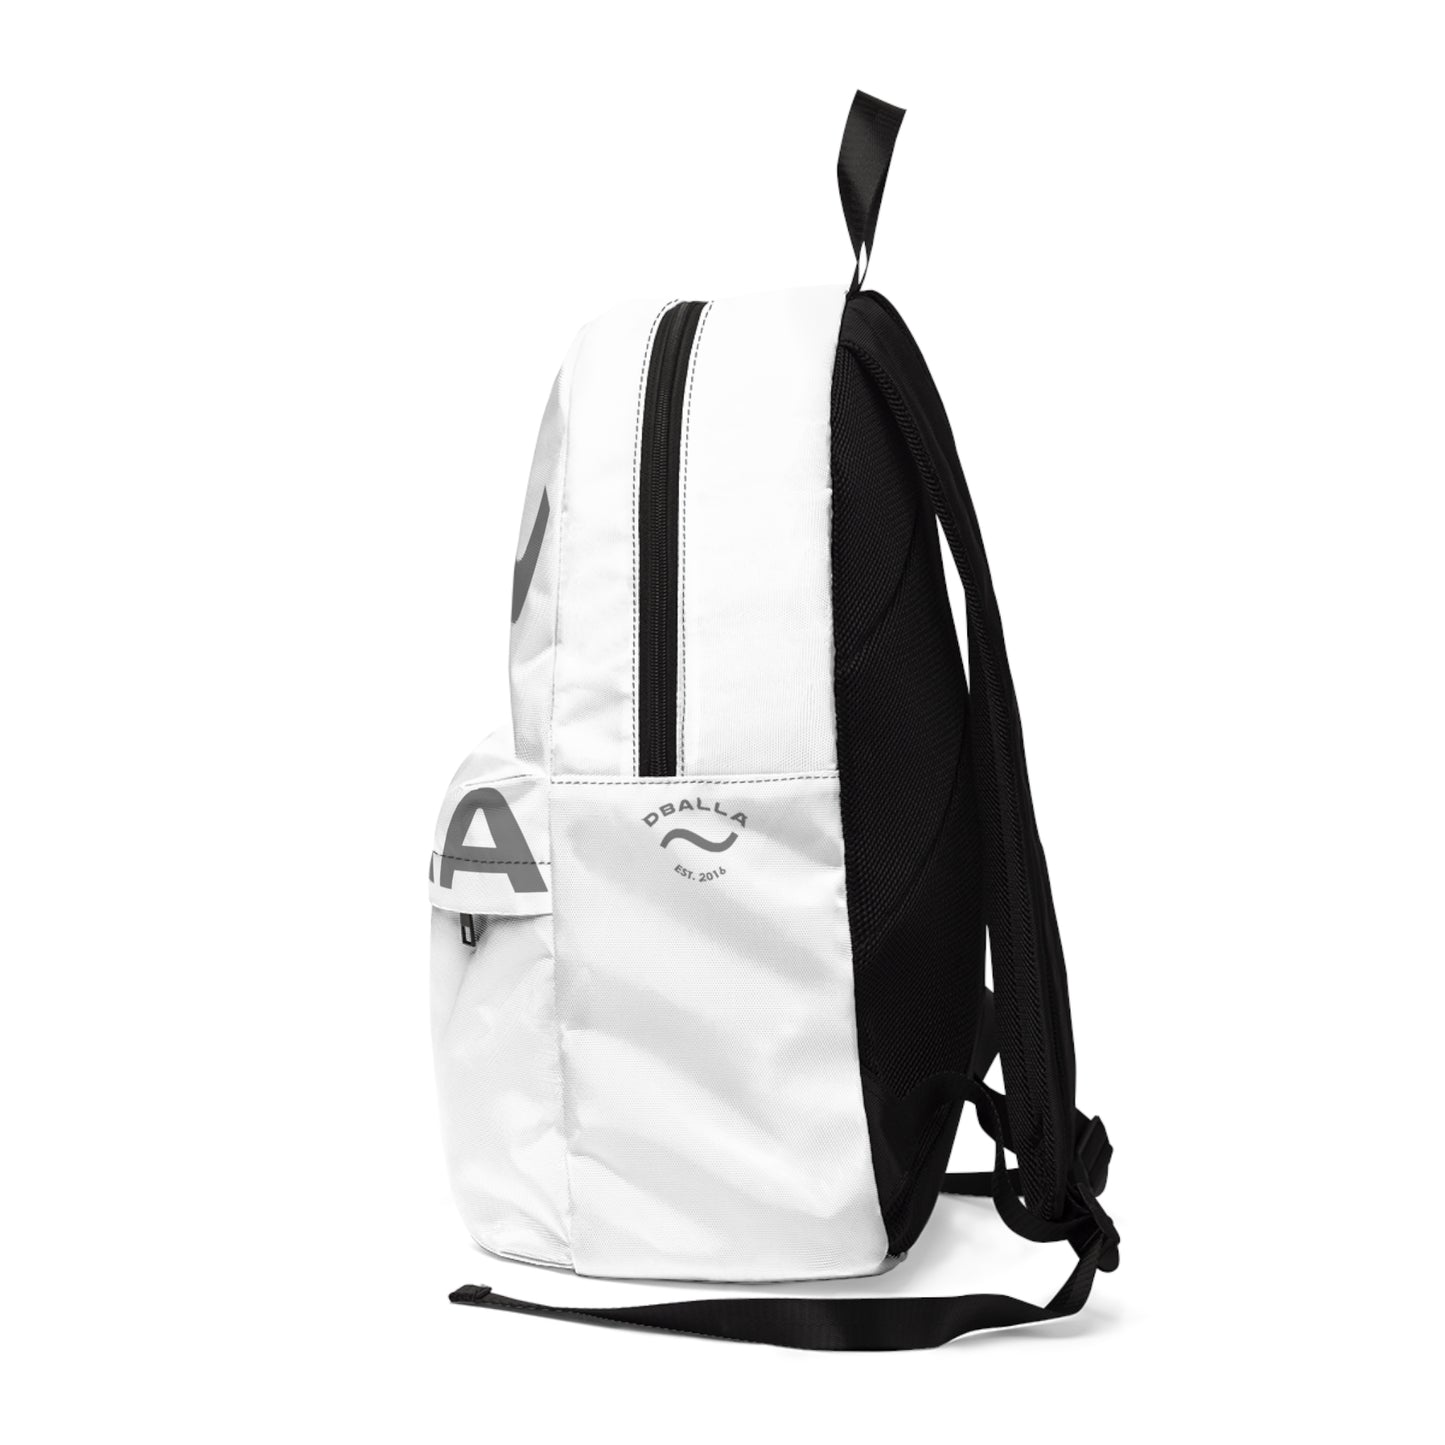 "THE CENTURION" Ivory backpack